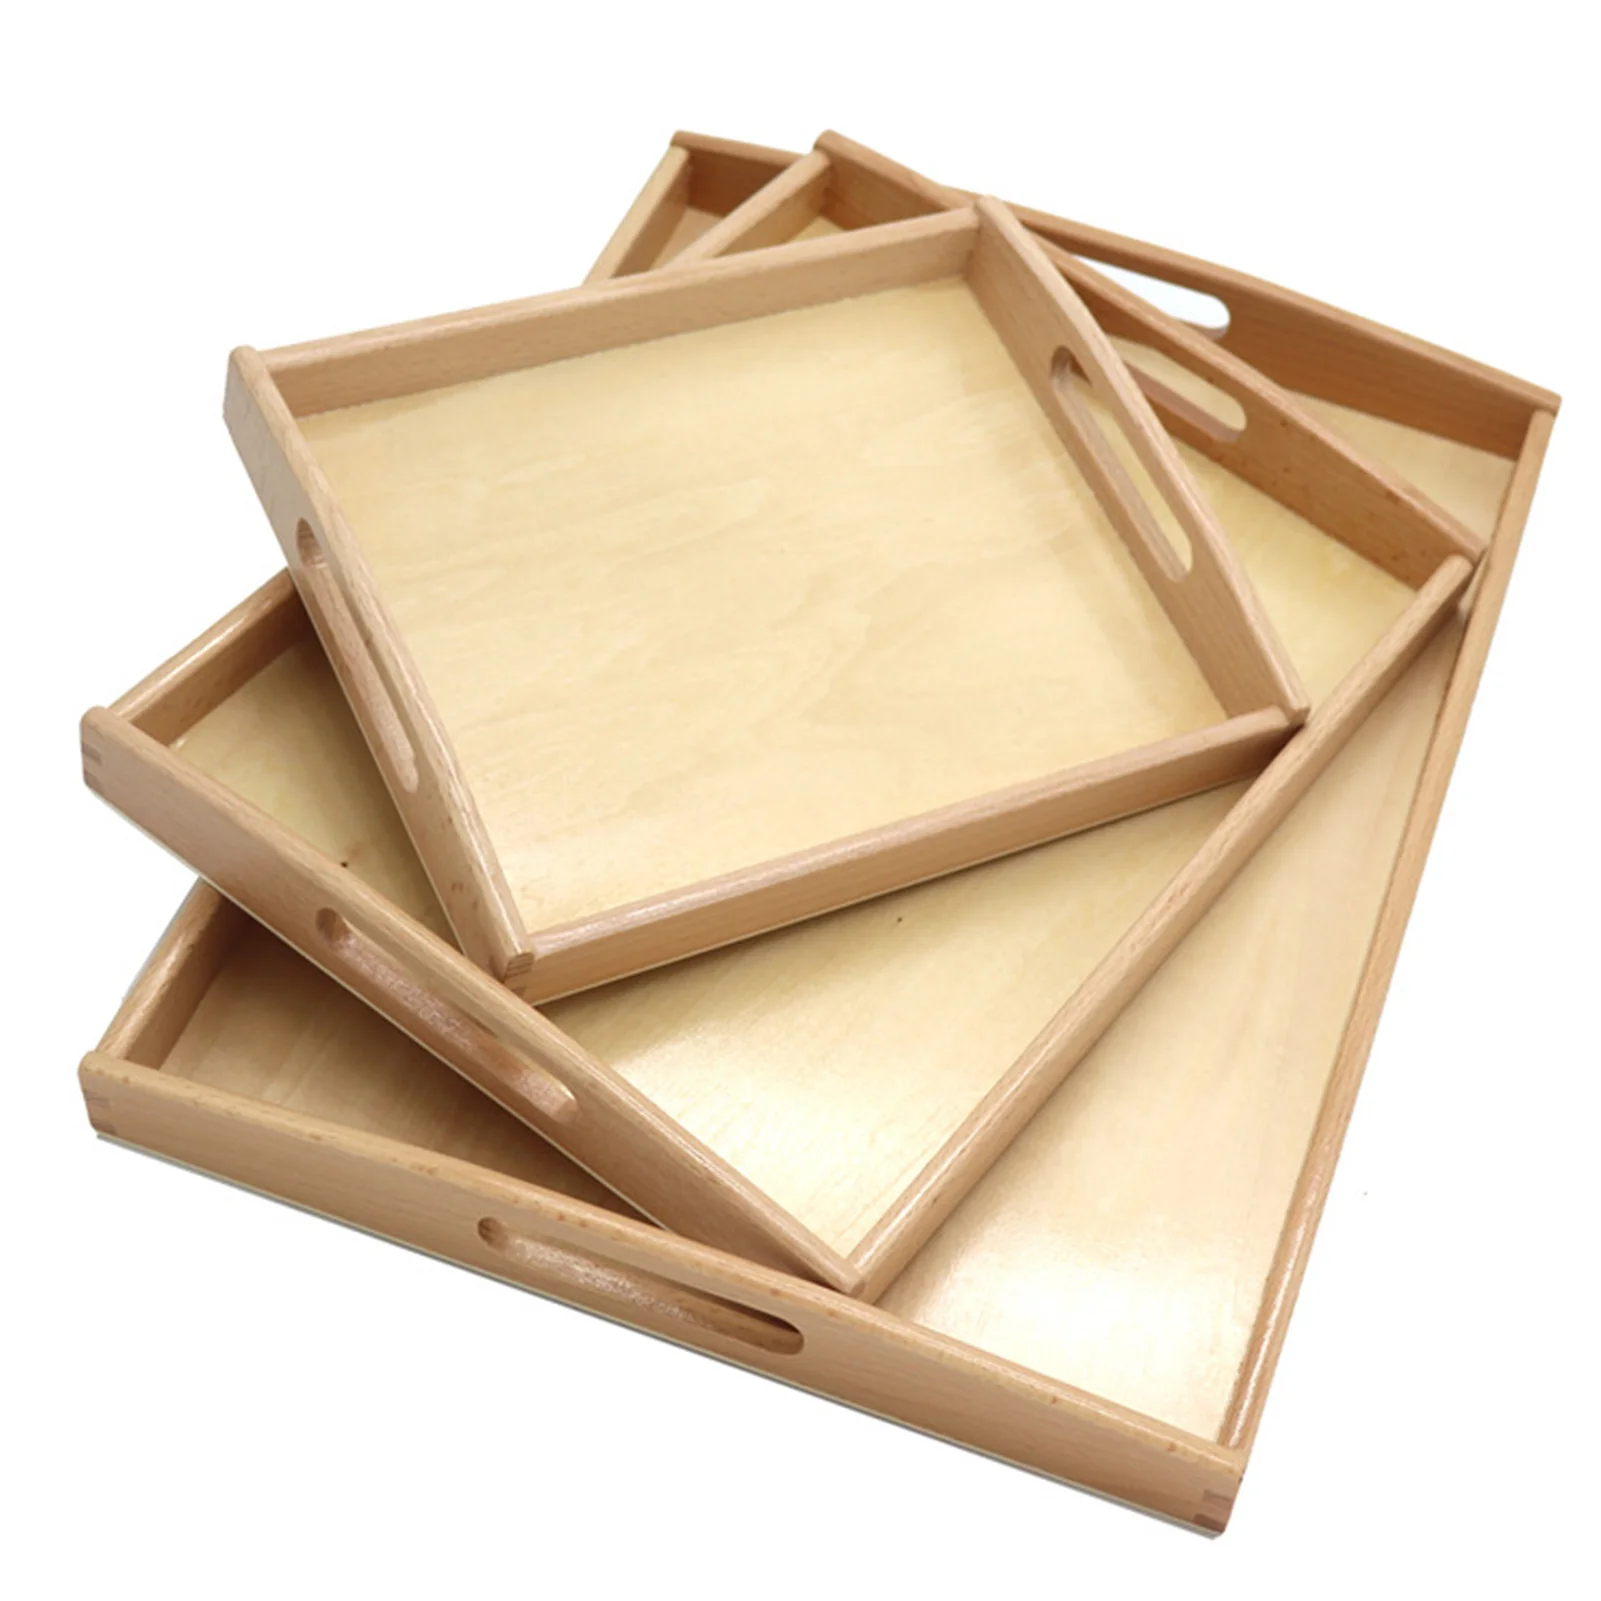 

Montessori Trays Wood Set Educational Preschool Learning Toys For Children Wooden Tray With Handles Teaching Aids For Children